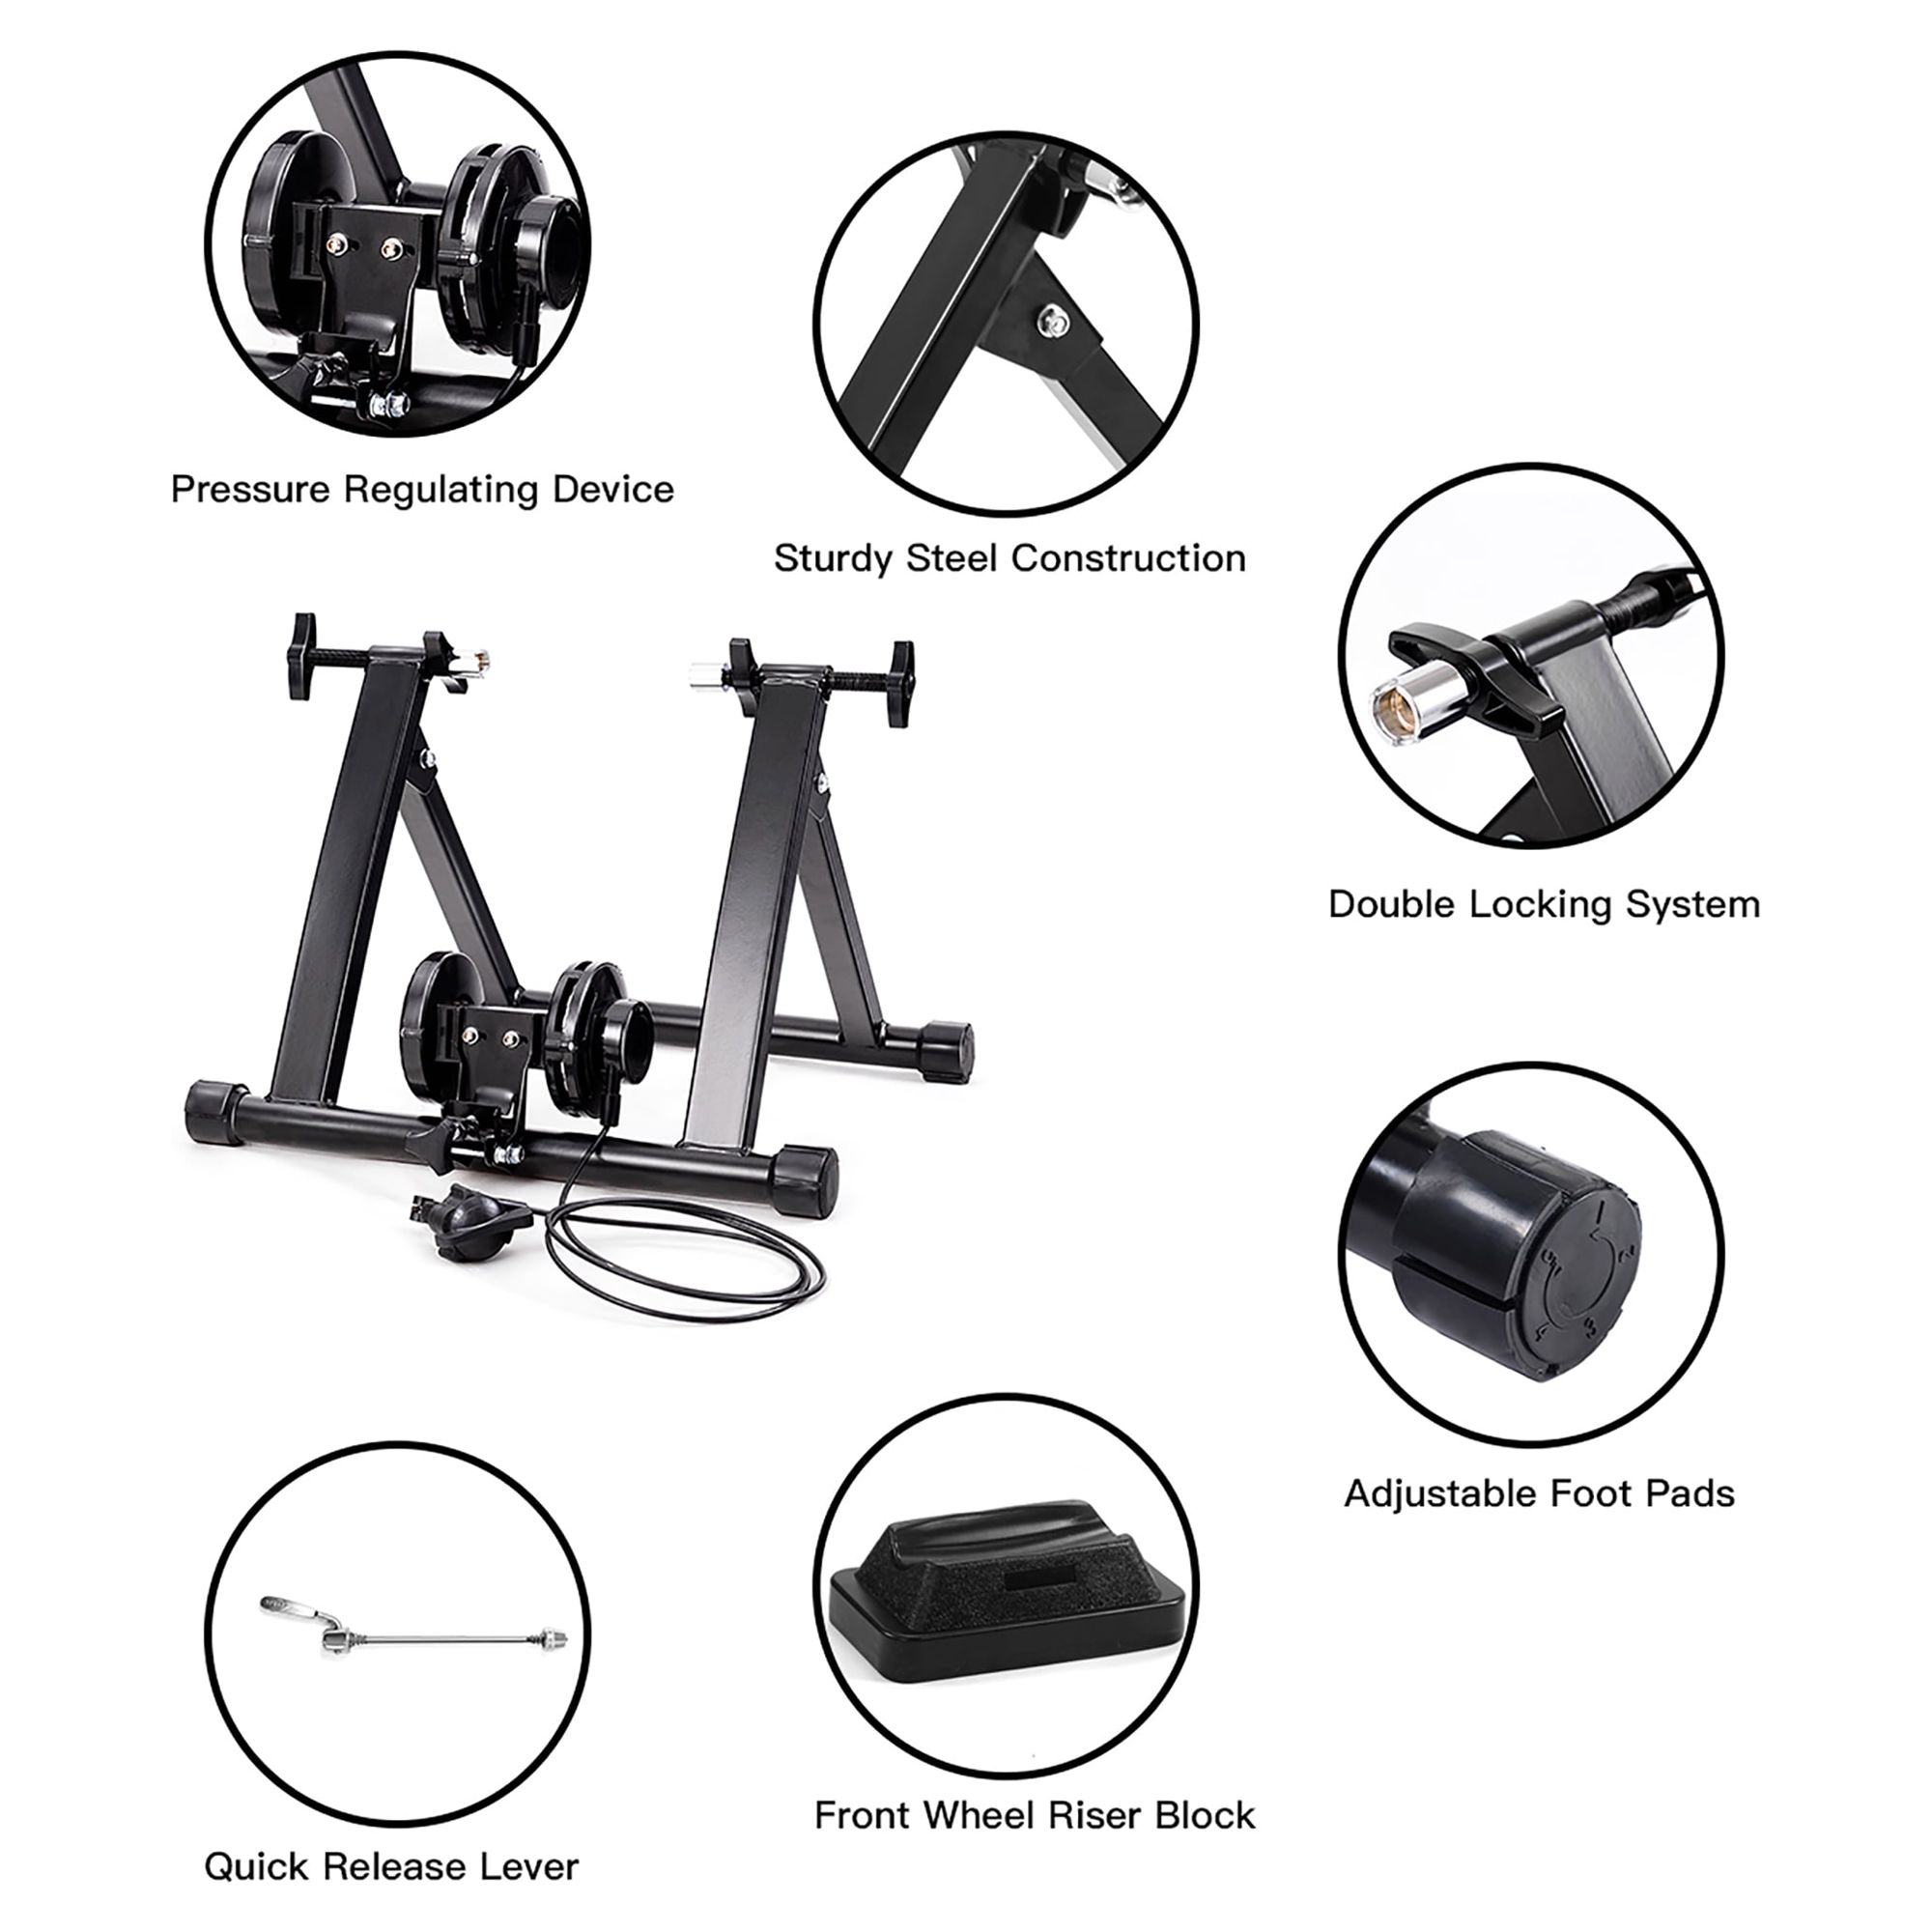 Costway Magnetic Indoor Bicycle Bike Trainer Exercise Stand 8 Levels of Resistance - image 4 of 8